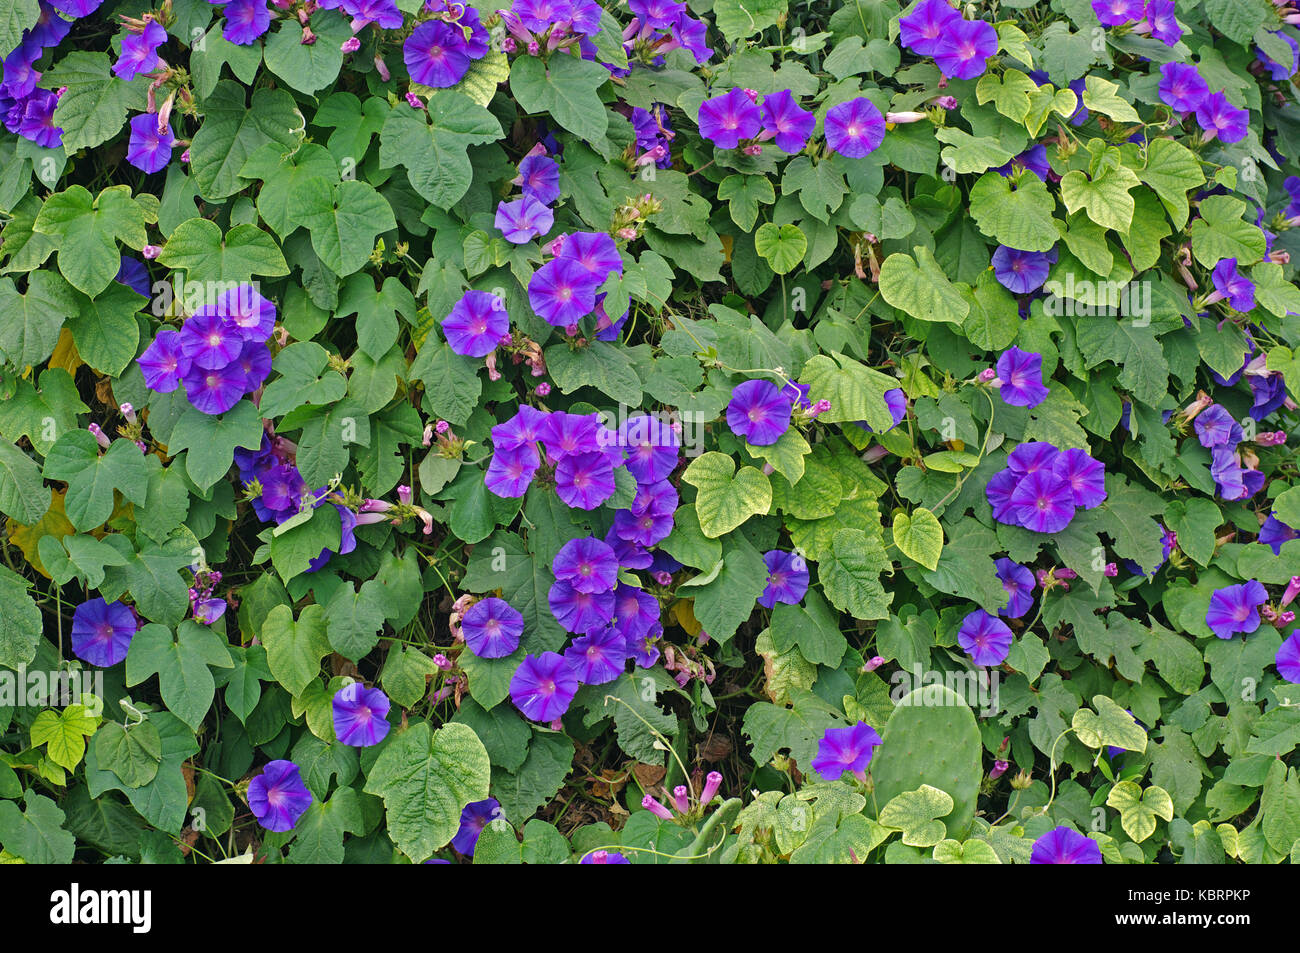 this is Ipomea indica, the Blue morning glory or Blue dawn flower, from the family Convolvulaceae Stock Photo